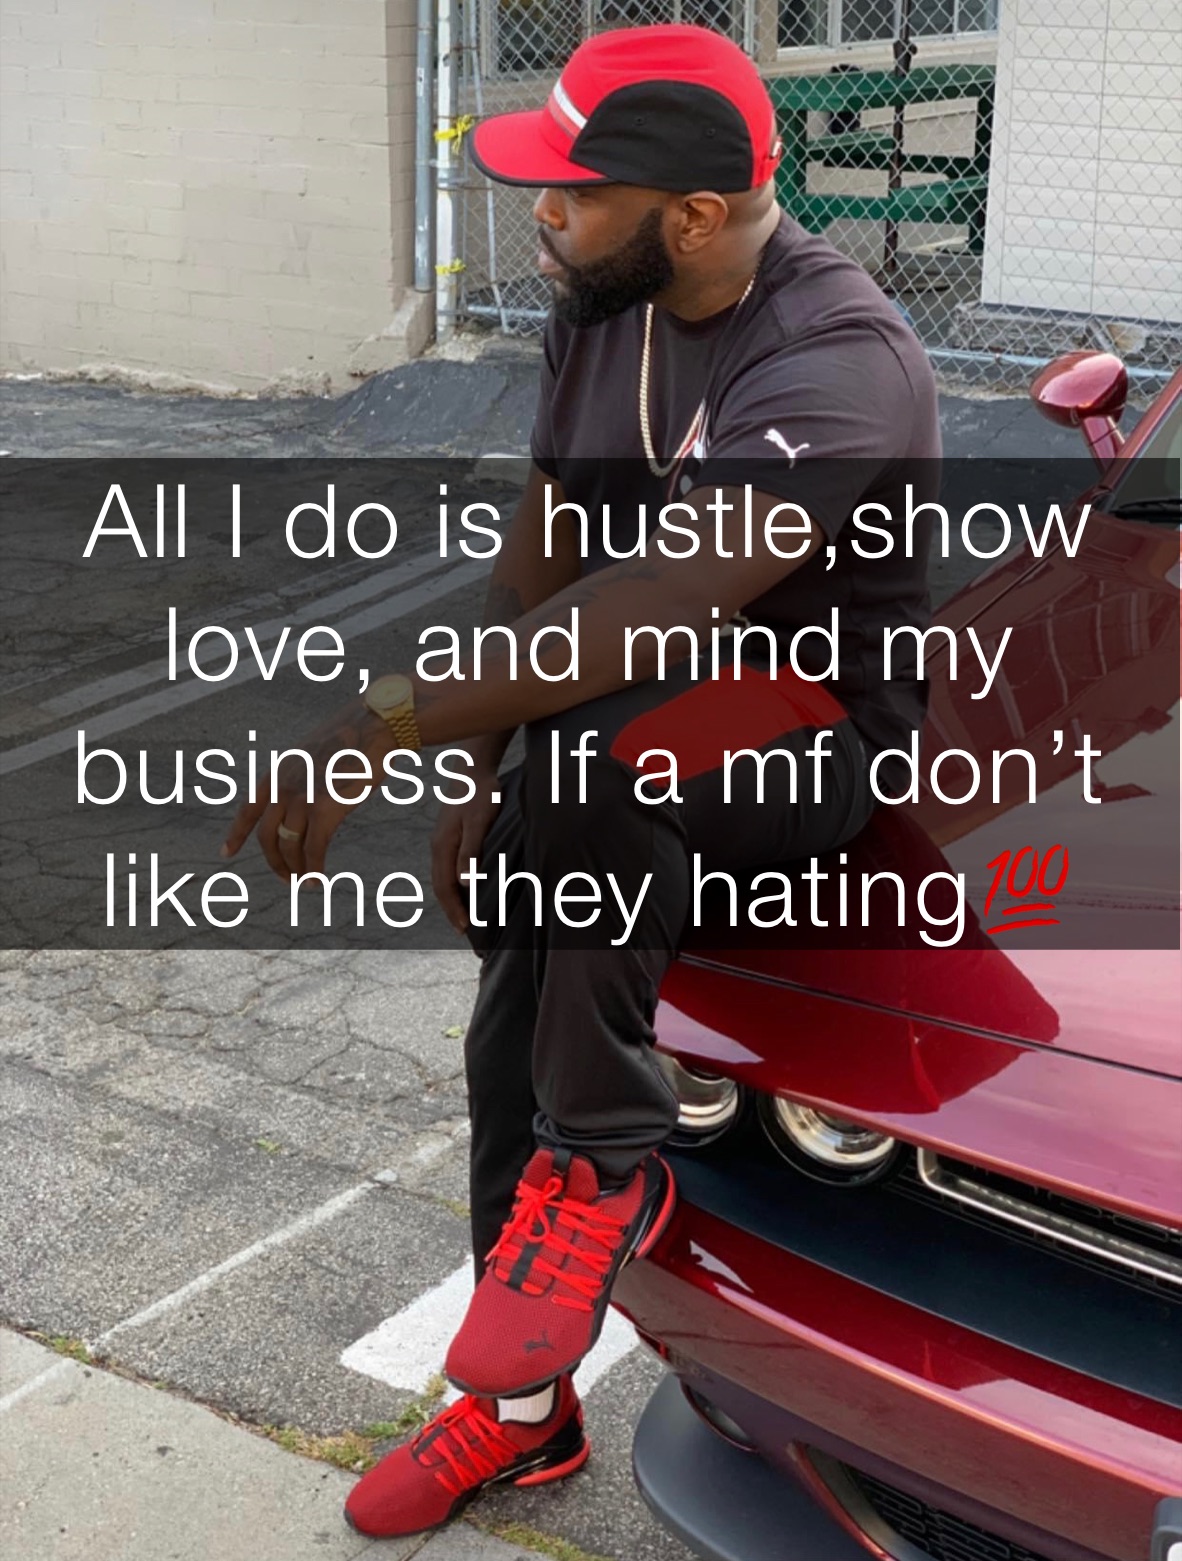 All I do is hustle,show love, and mind my business. If a mf don’t like me they hating💯